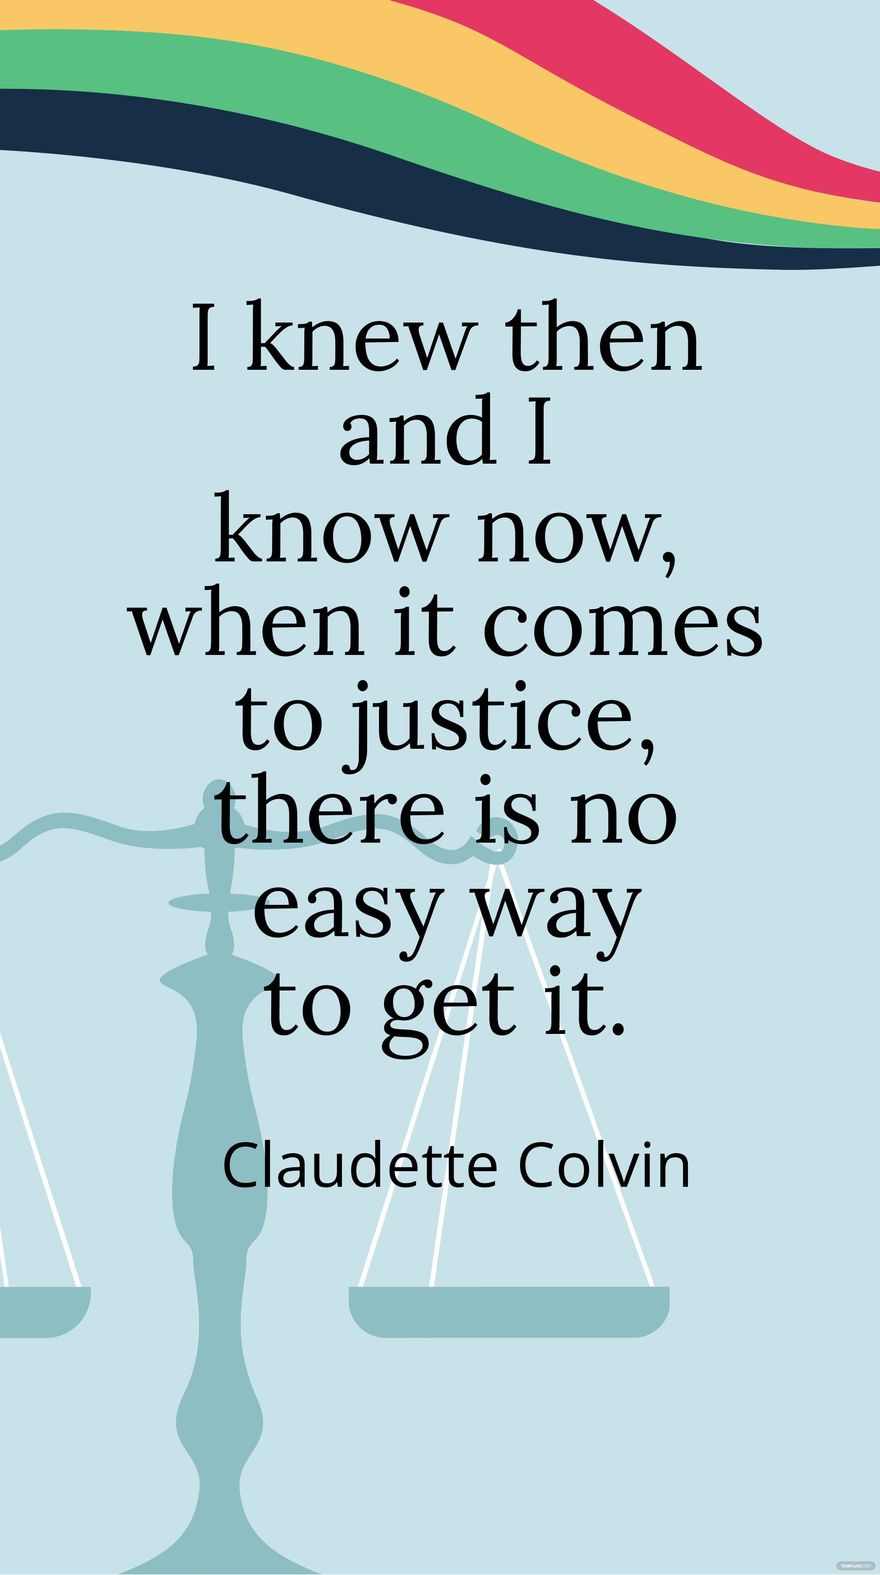 Free Claudette Colvin - I knew then and I know now, when it comes to justice, there is no easy way to get it. in JPG